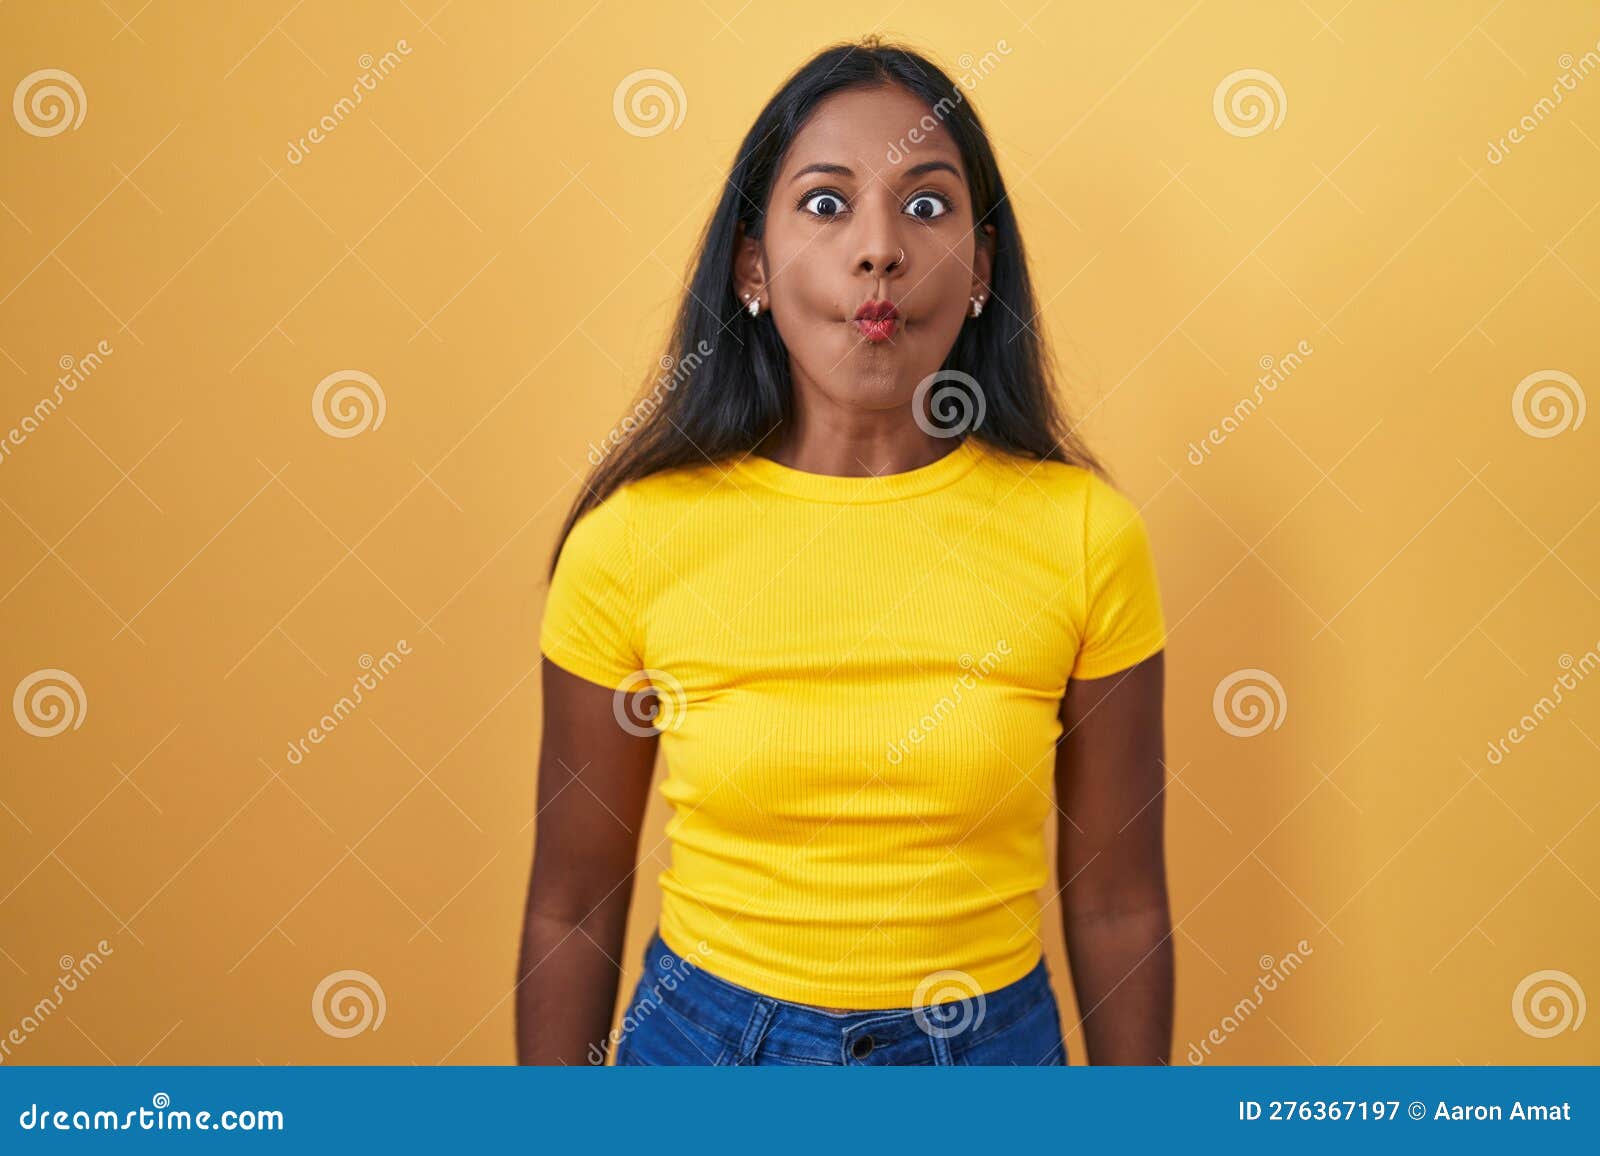 Young Indian Woman Standing Over Yellow Background Making Fish